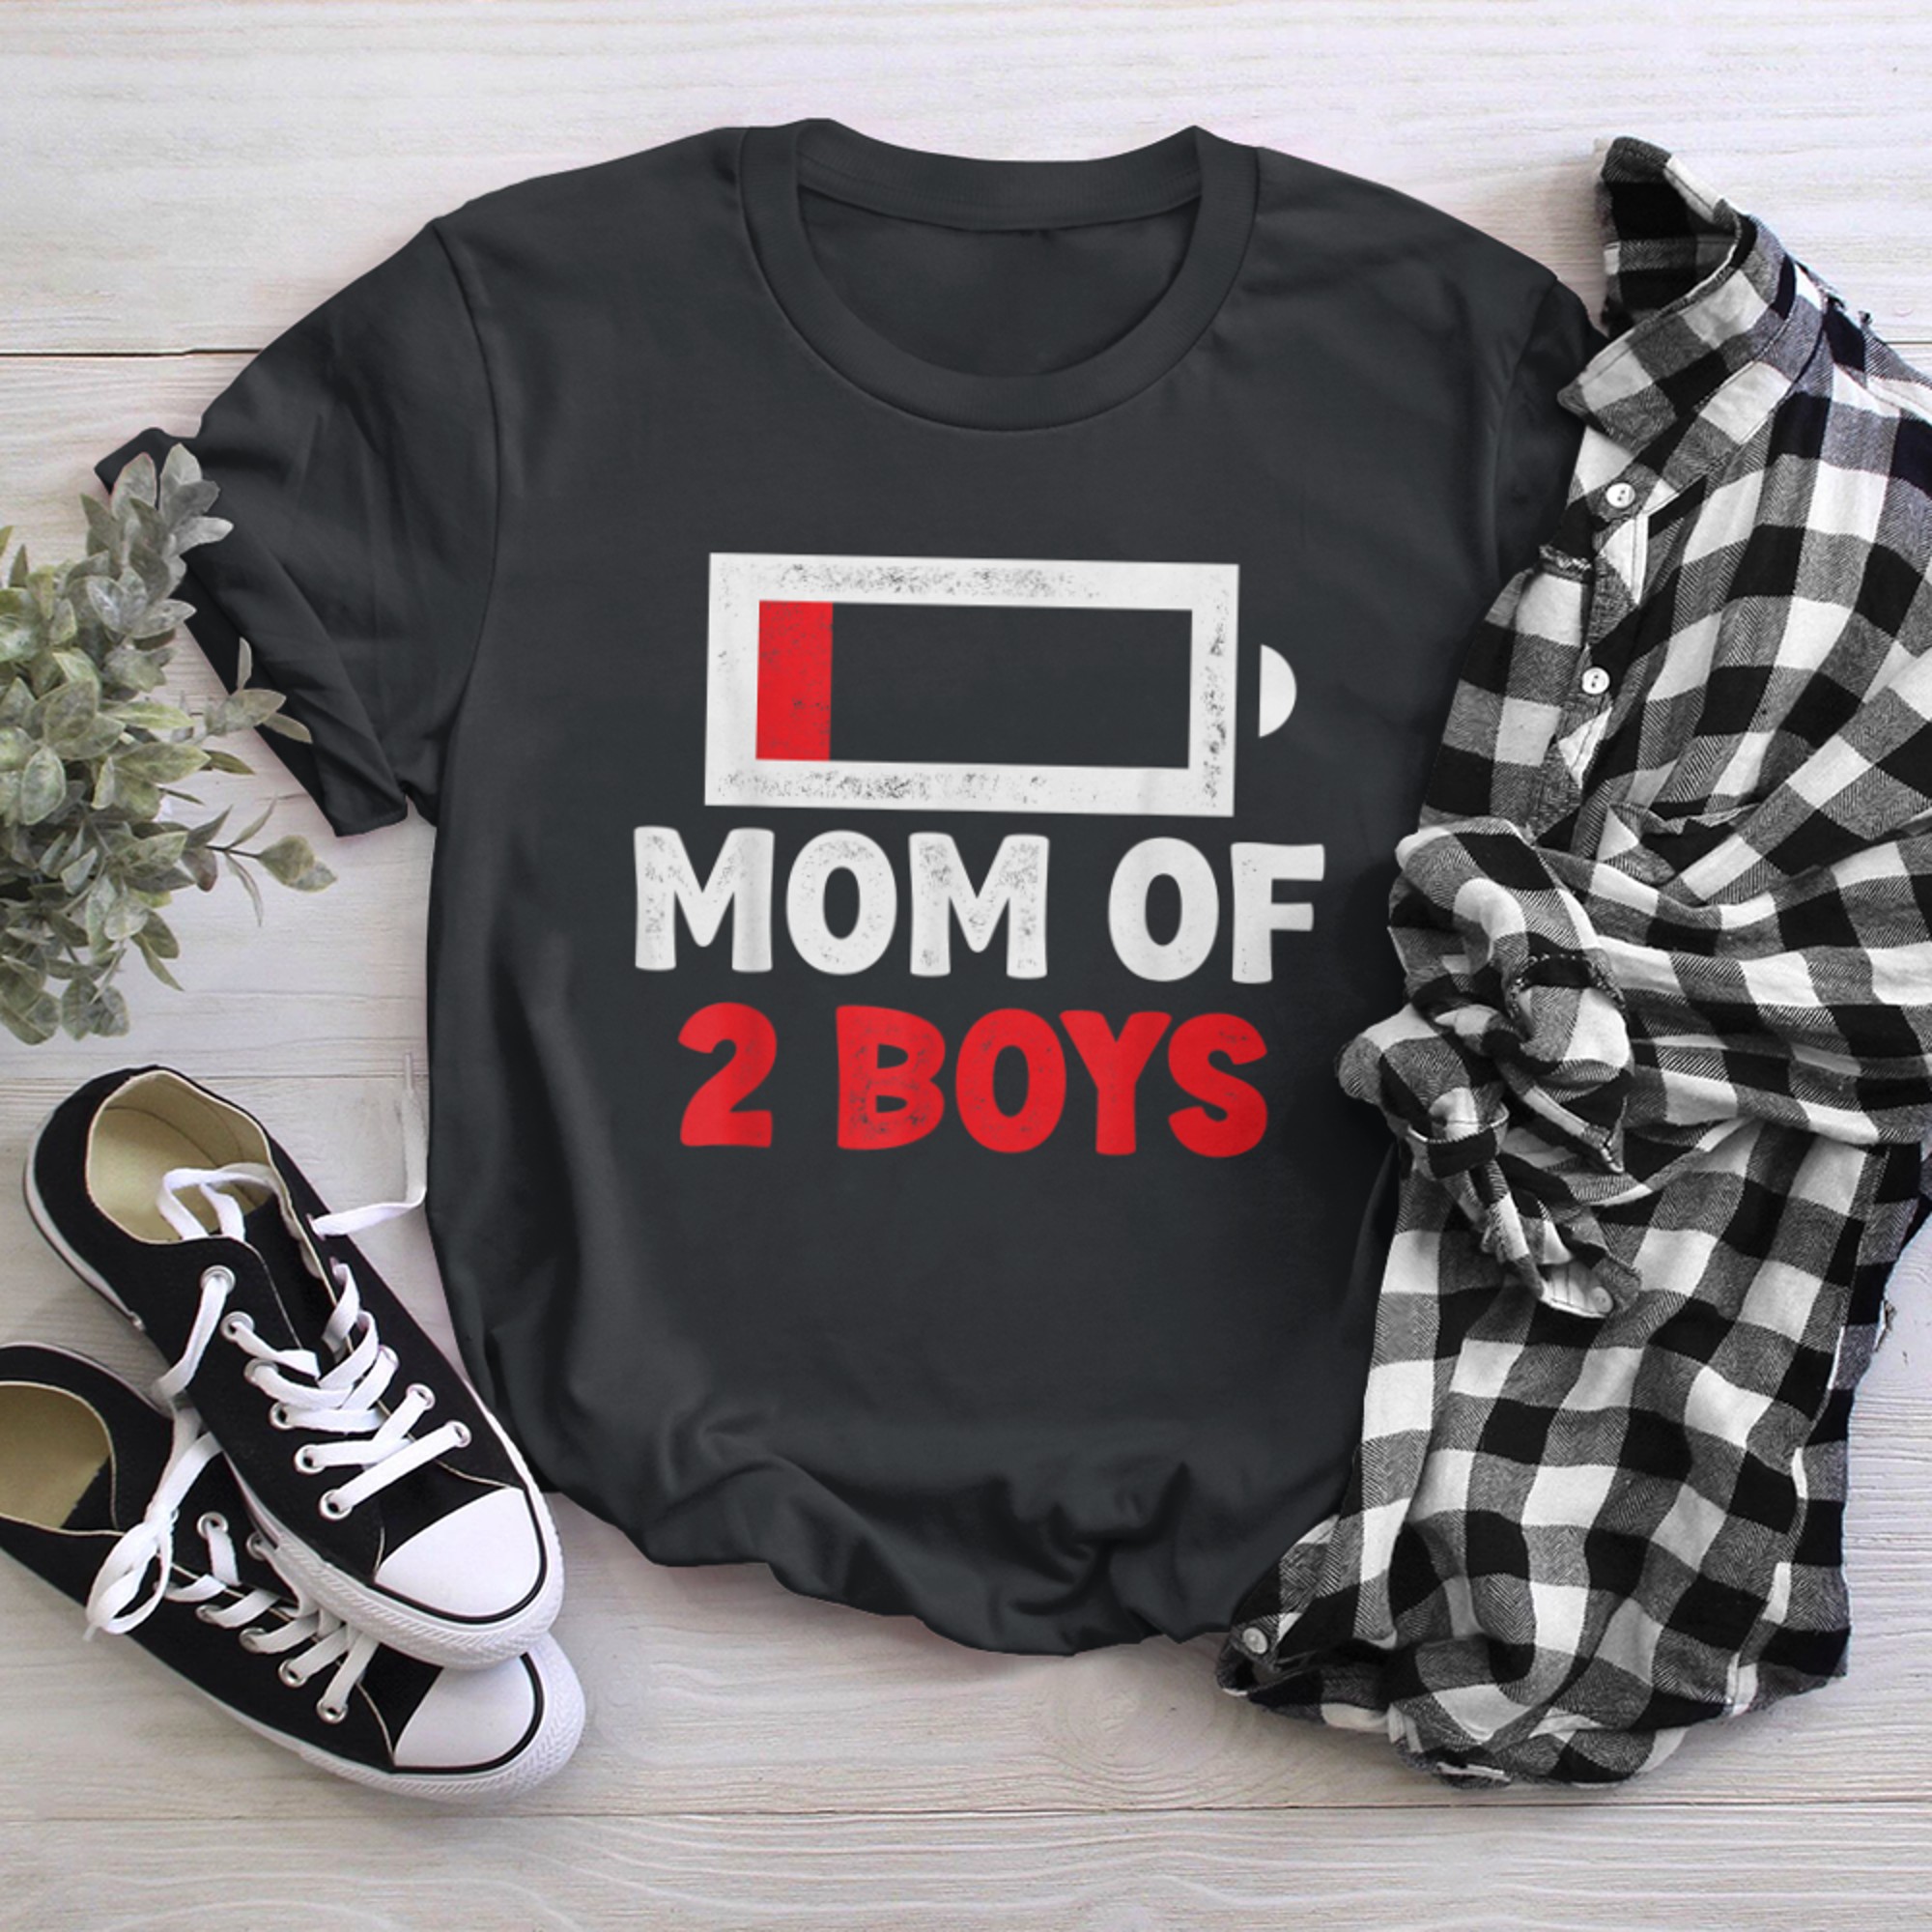 Mom of Funny from Son Mothers Day Birthday t-shirt black